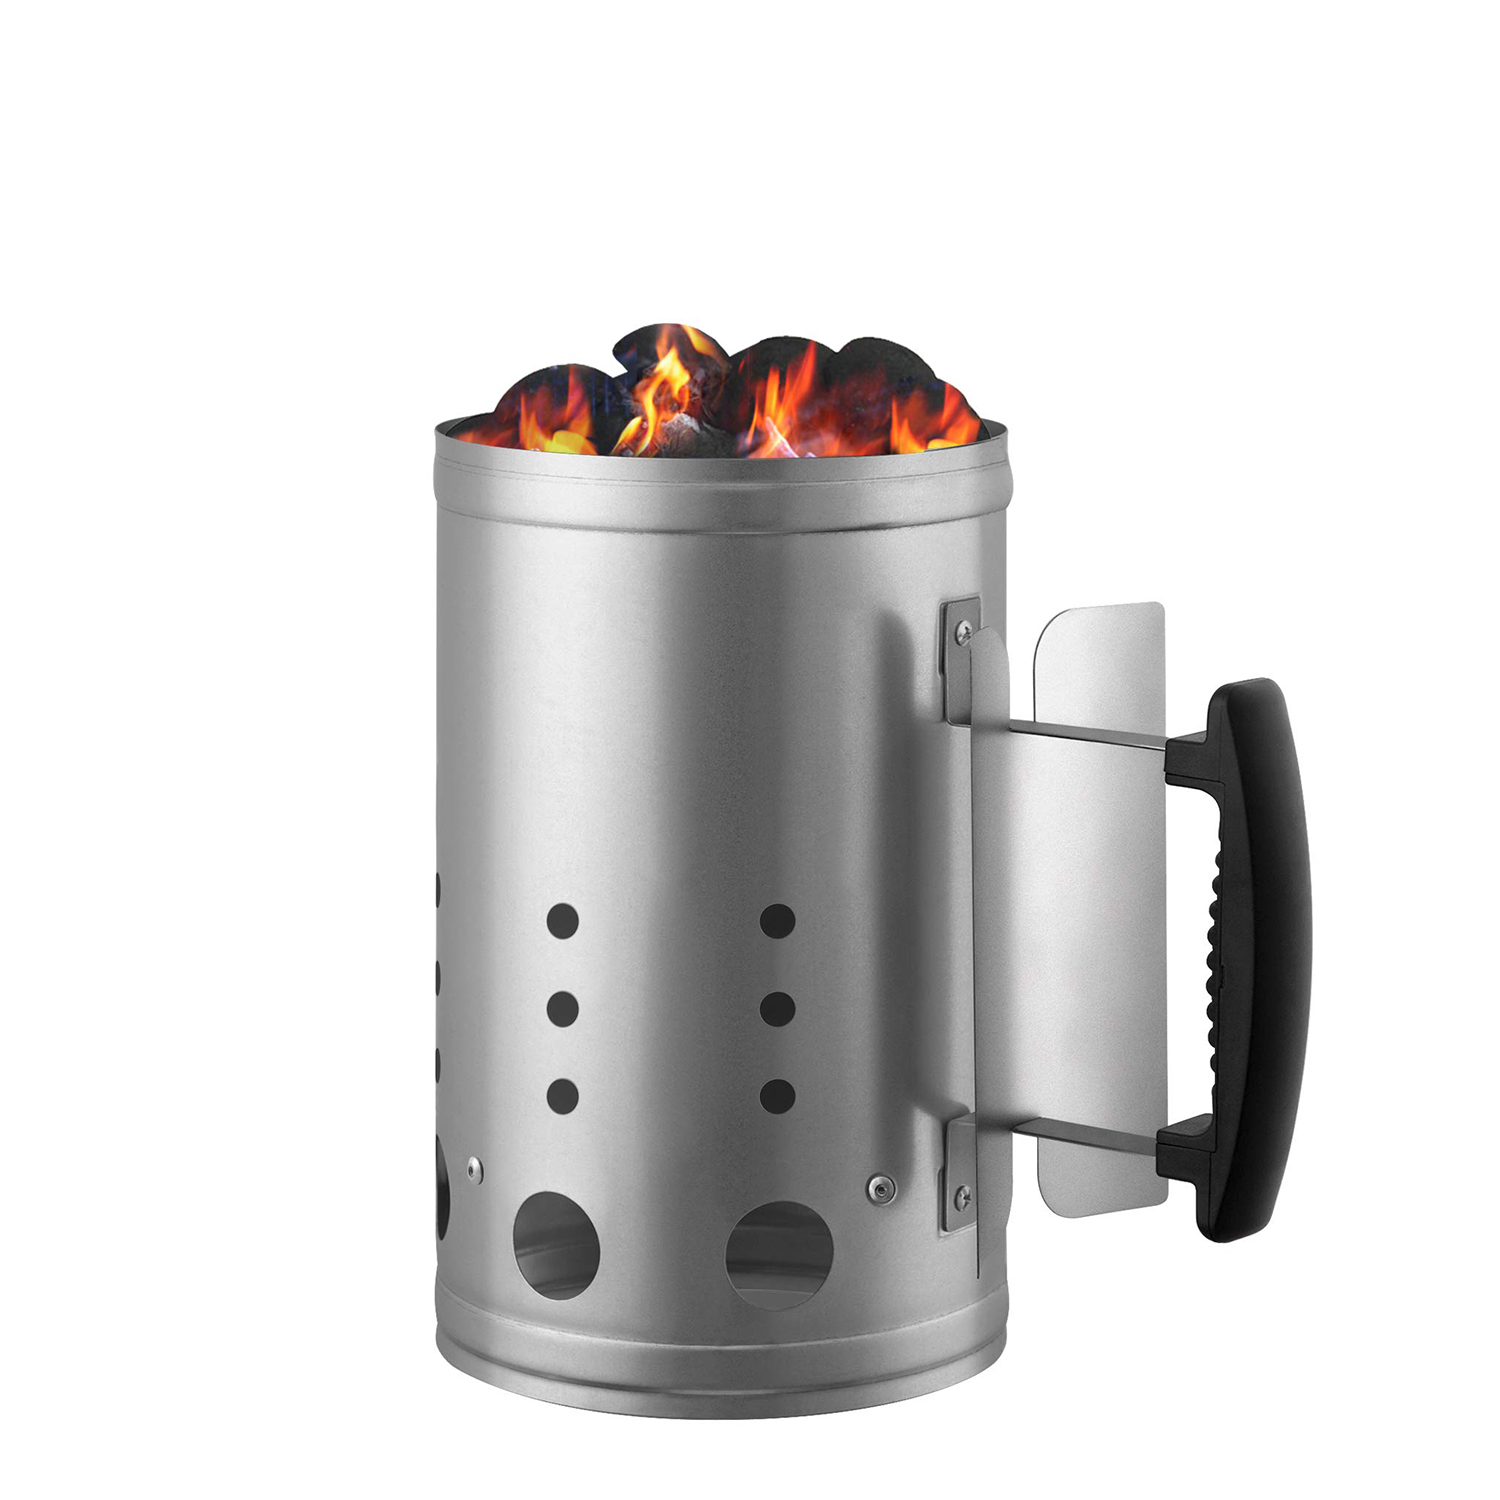 Rapidfire Chimney Starter, Outdoor Cooking Charcoal Can Accessories